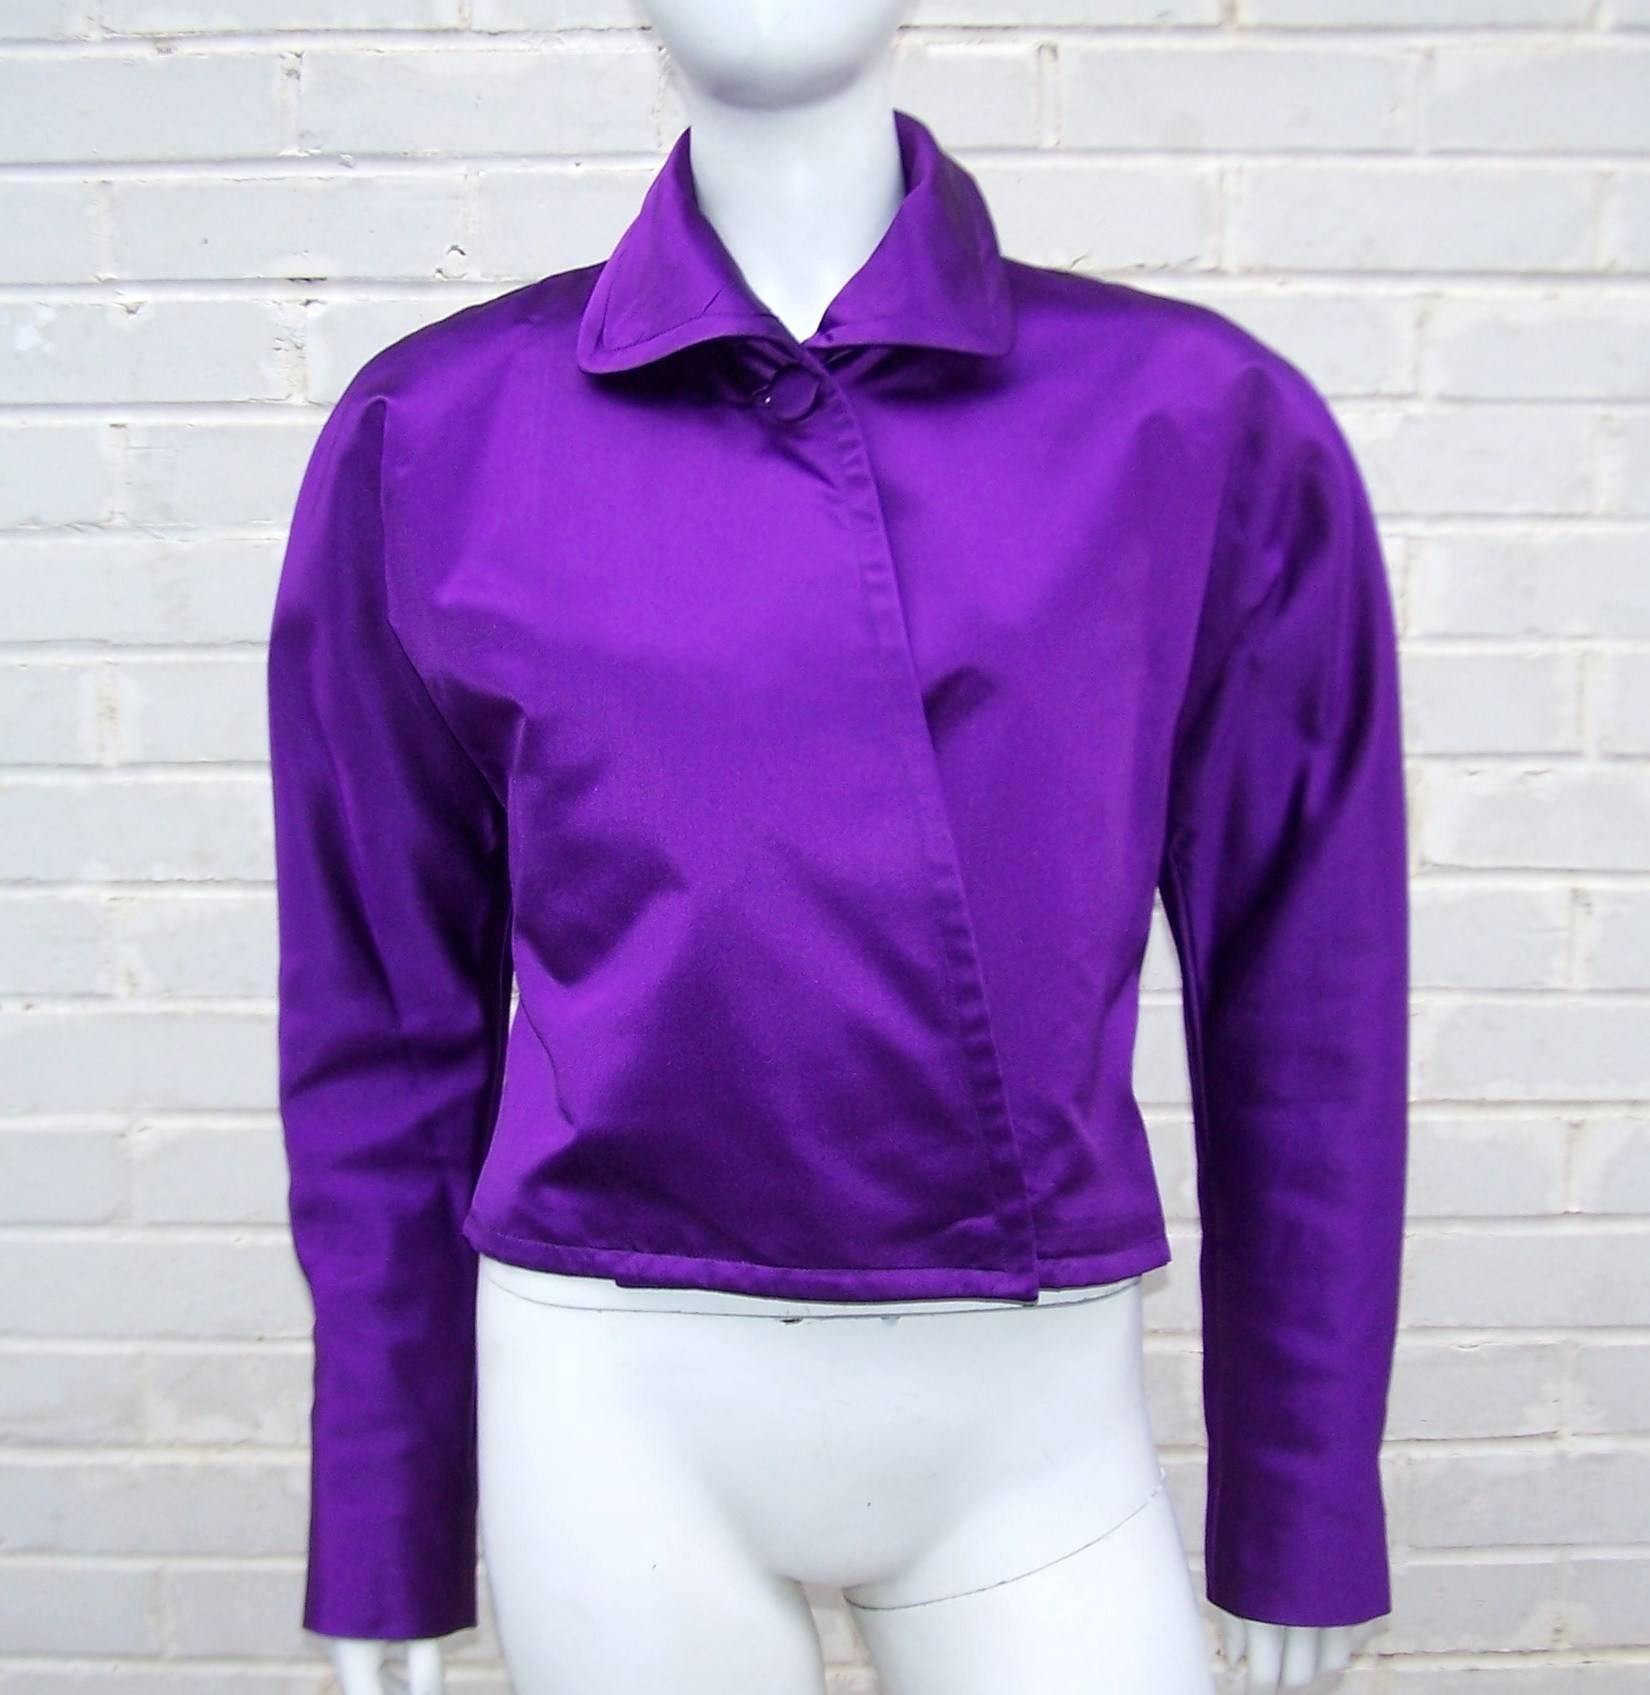 And she's off!  Coming down the stretch in her fabulous Ralph Lauren royal purple silk satin jockey style jacket!  It's a winner.  The jacket has a dolman sleeve construction with crossover buttons at the hem and fabric covered button at the collar.